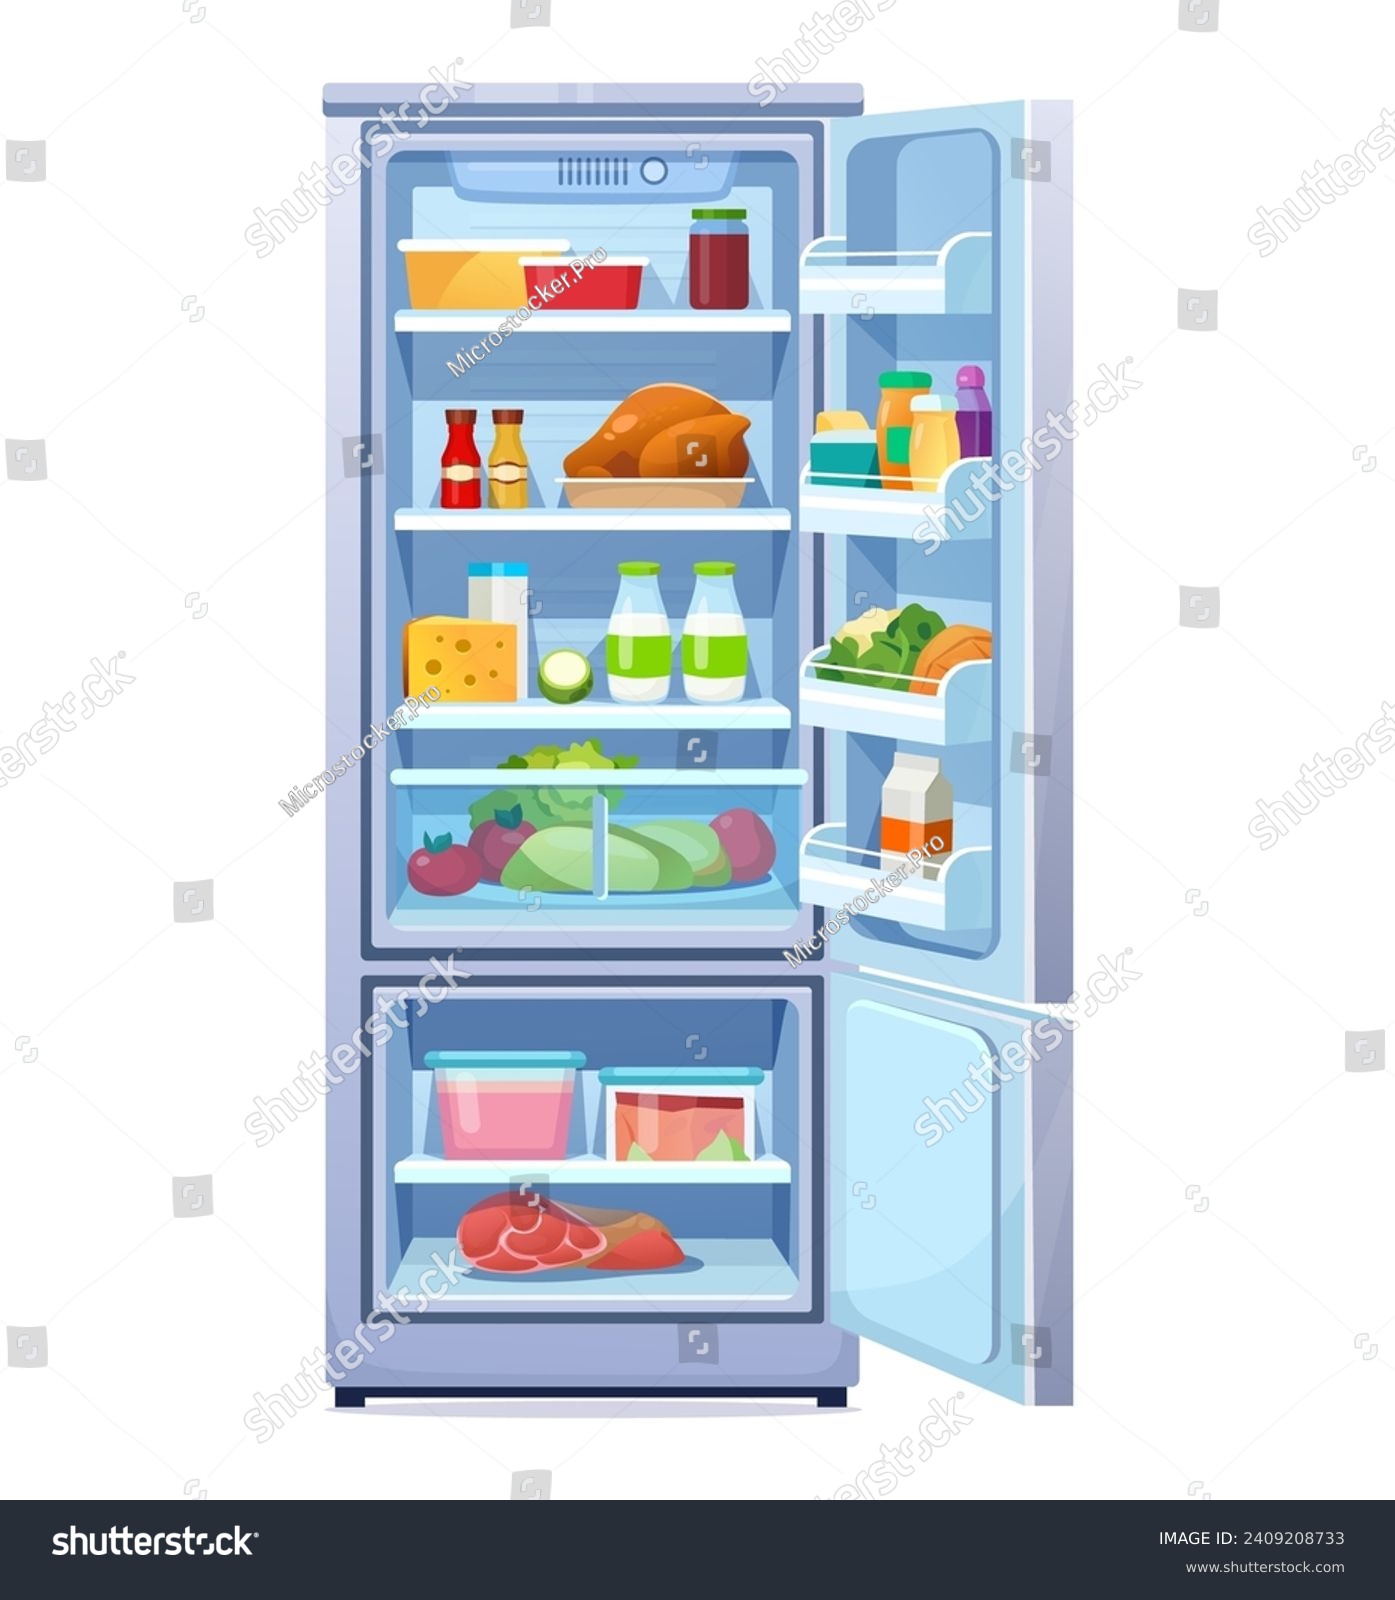 SVG of Cartoon fridge vector illustration. Flat style open refrigerator with shelves full of healthy food. Front View of modern blue two-compartment refrigerator with freezer isolated on white background. svg